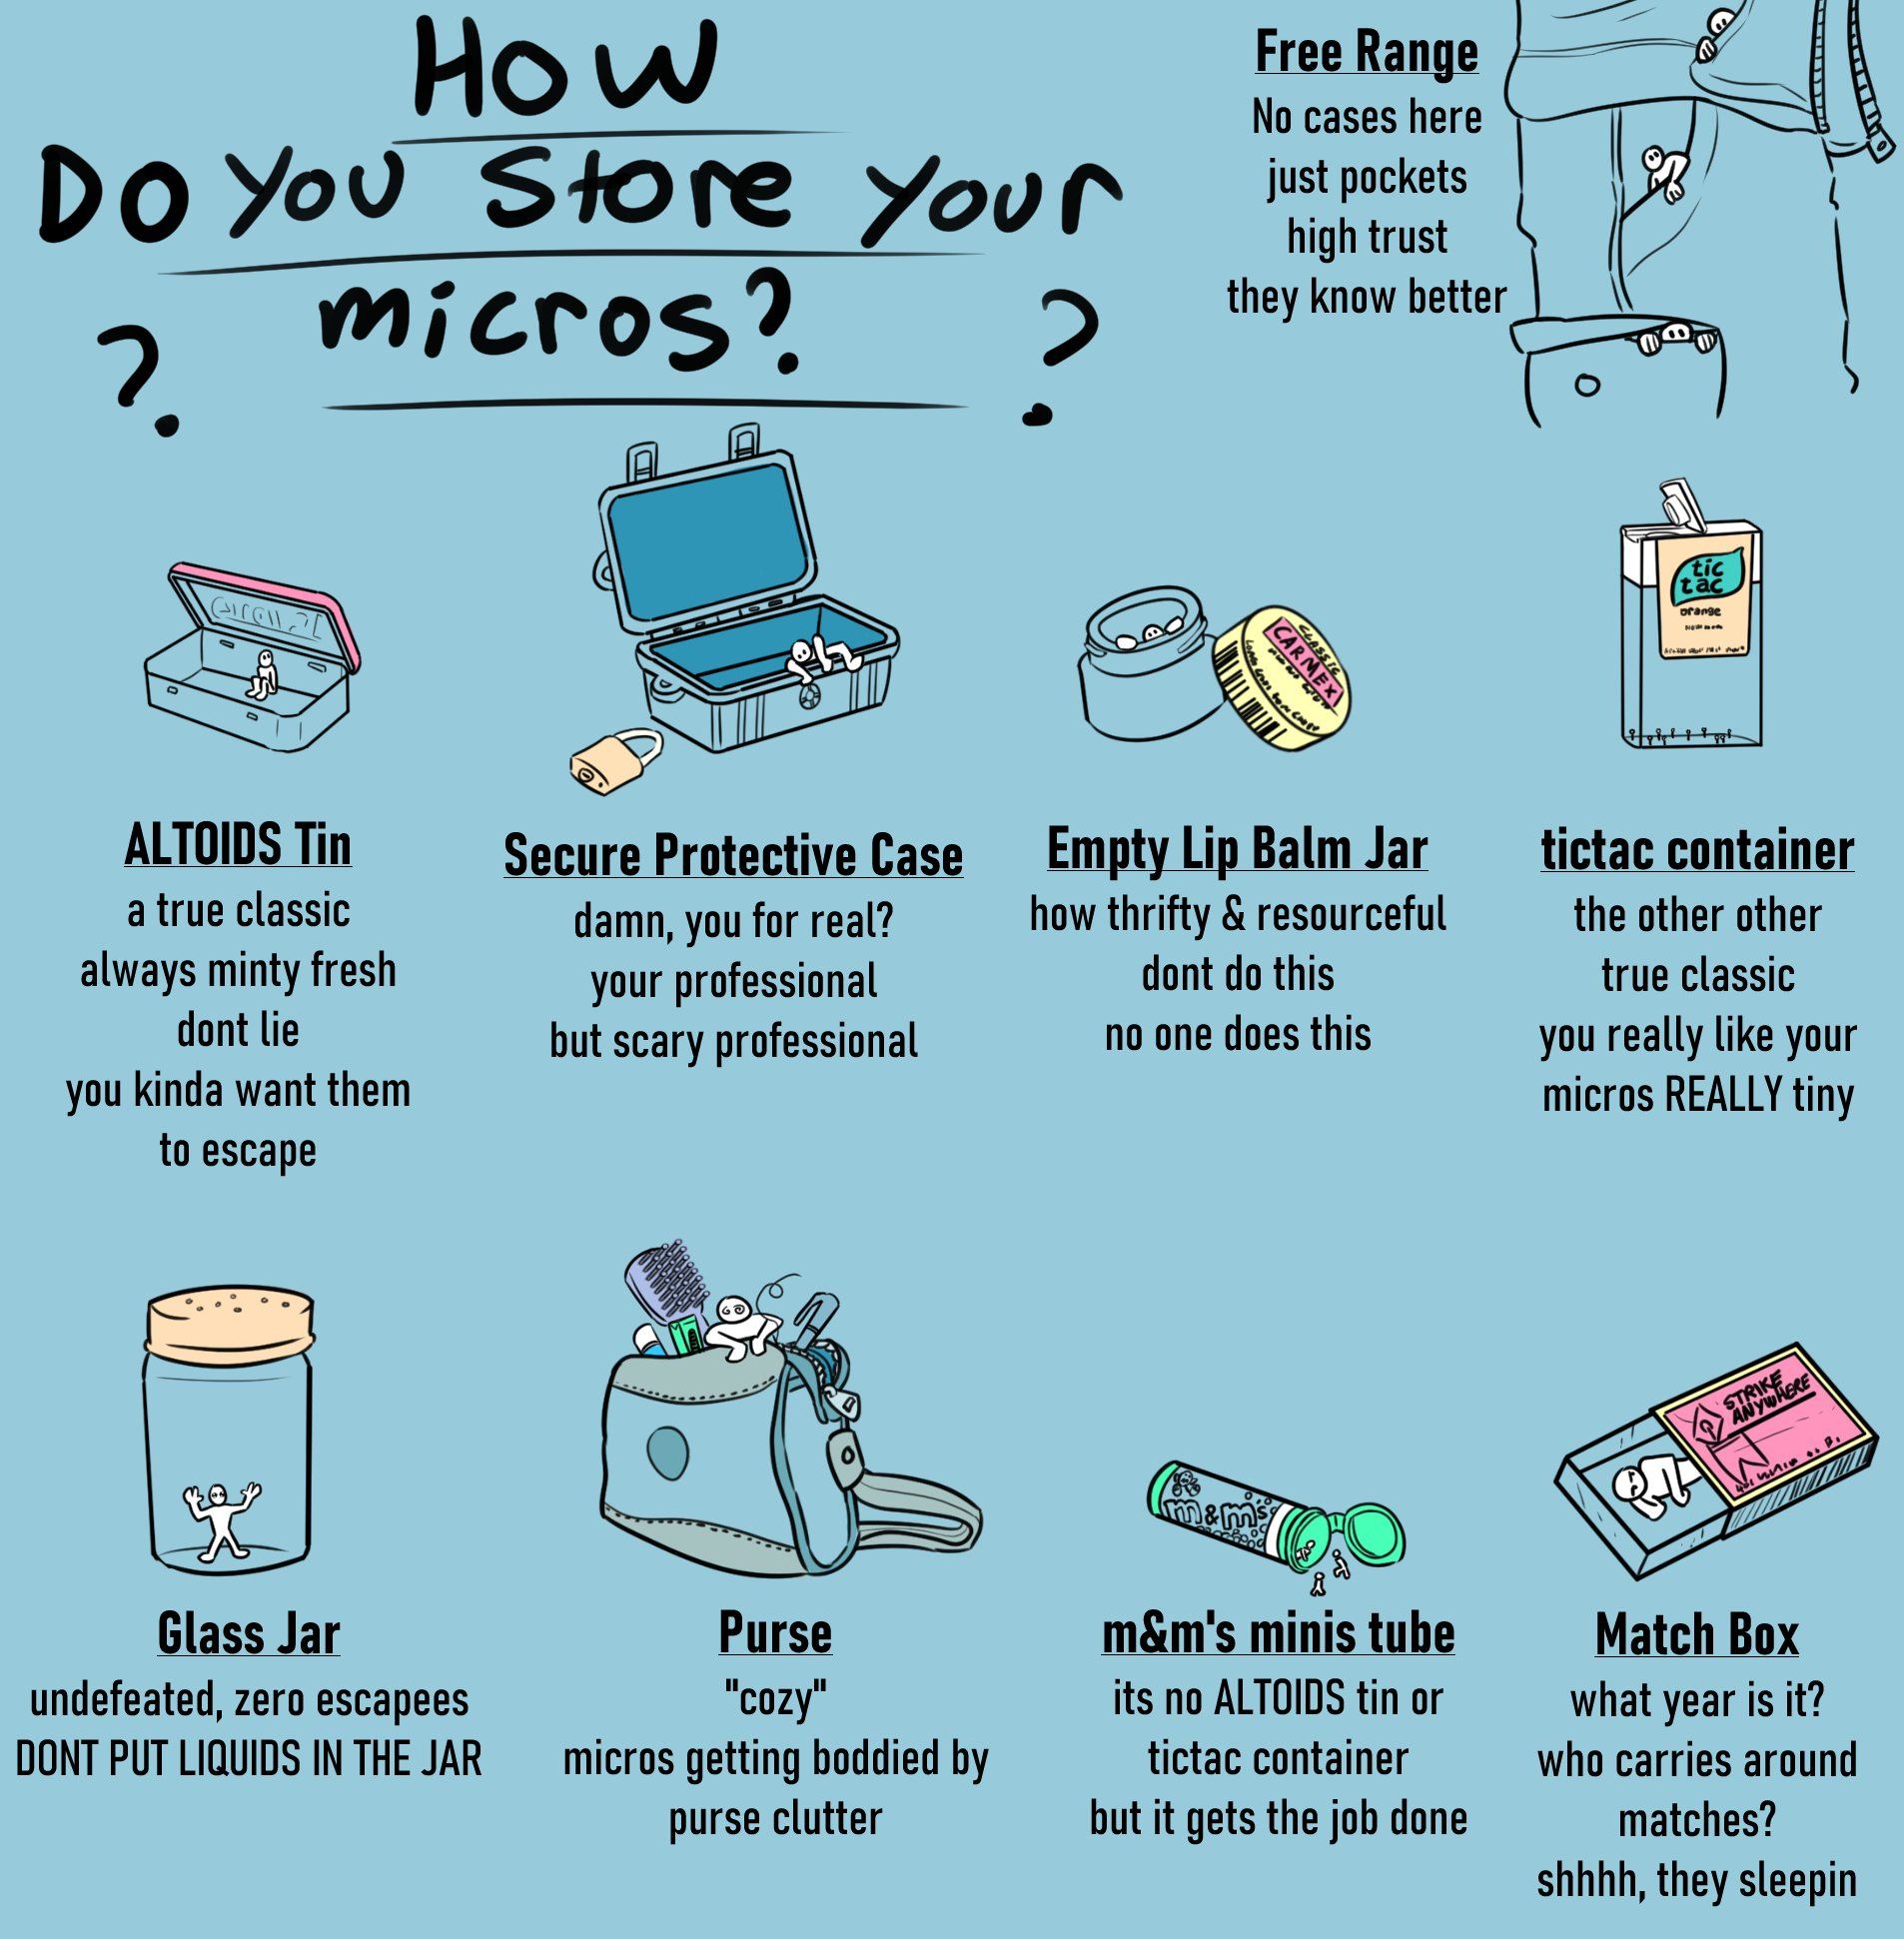 Sy_150_How_Do_You_Store_Your_Micros_1.jpg